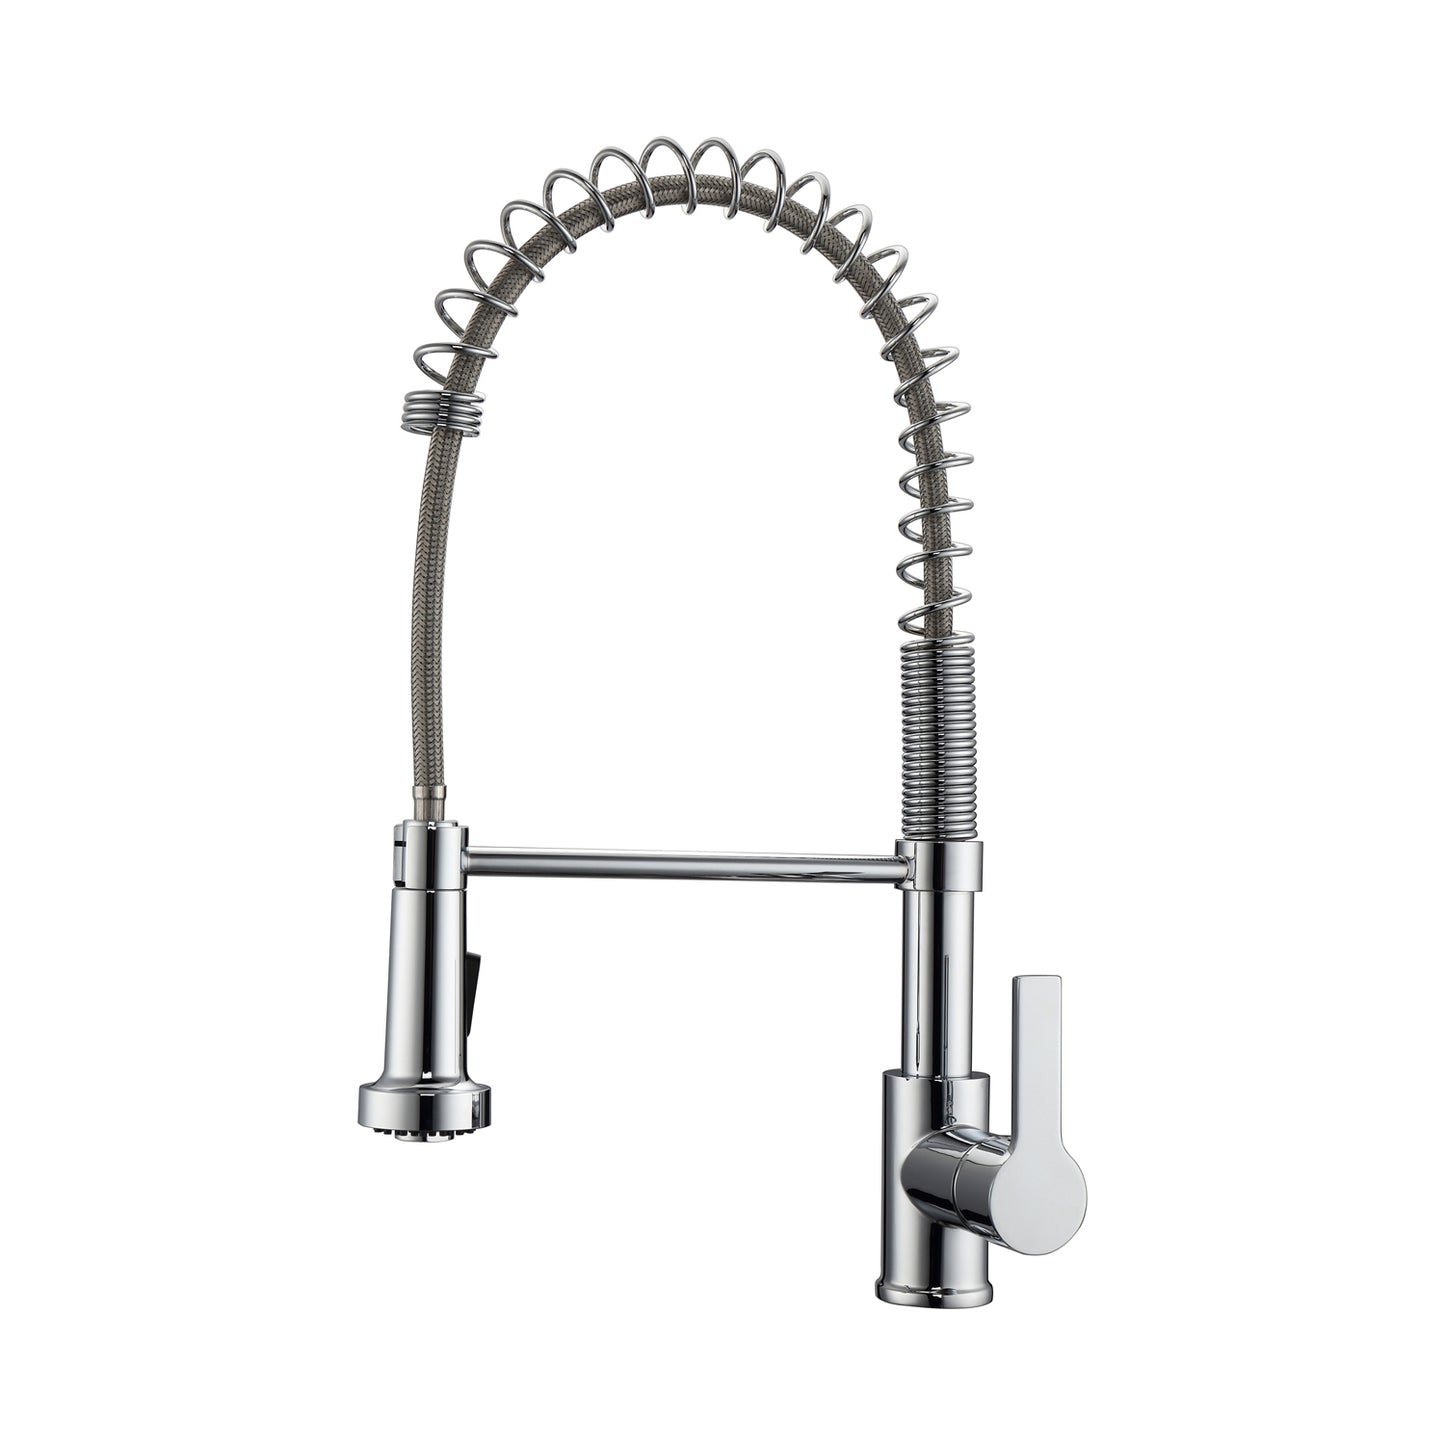 Niall 2 Kitchen Faucet, Spring, Pull-out Sprayer, Lever Handle, Chrome